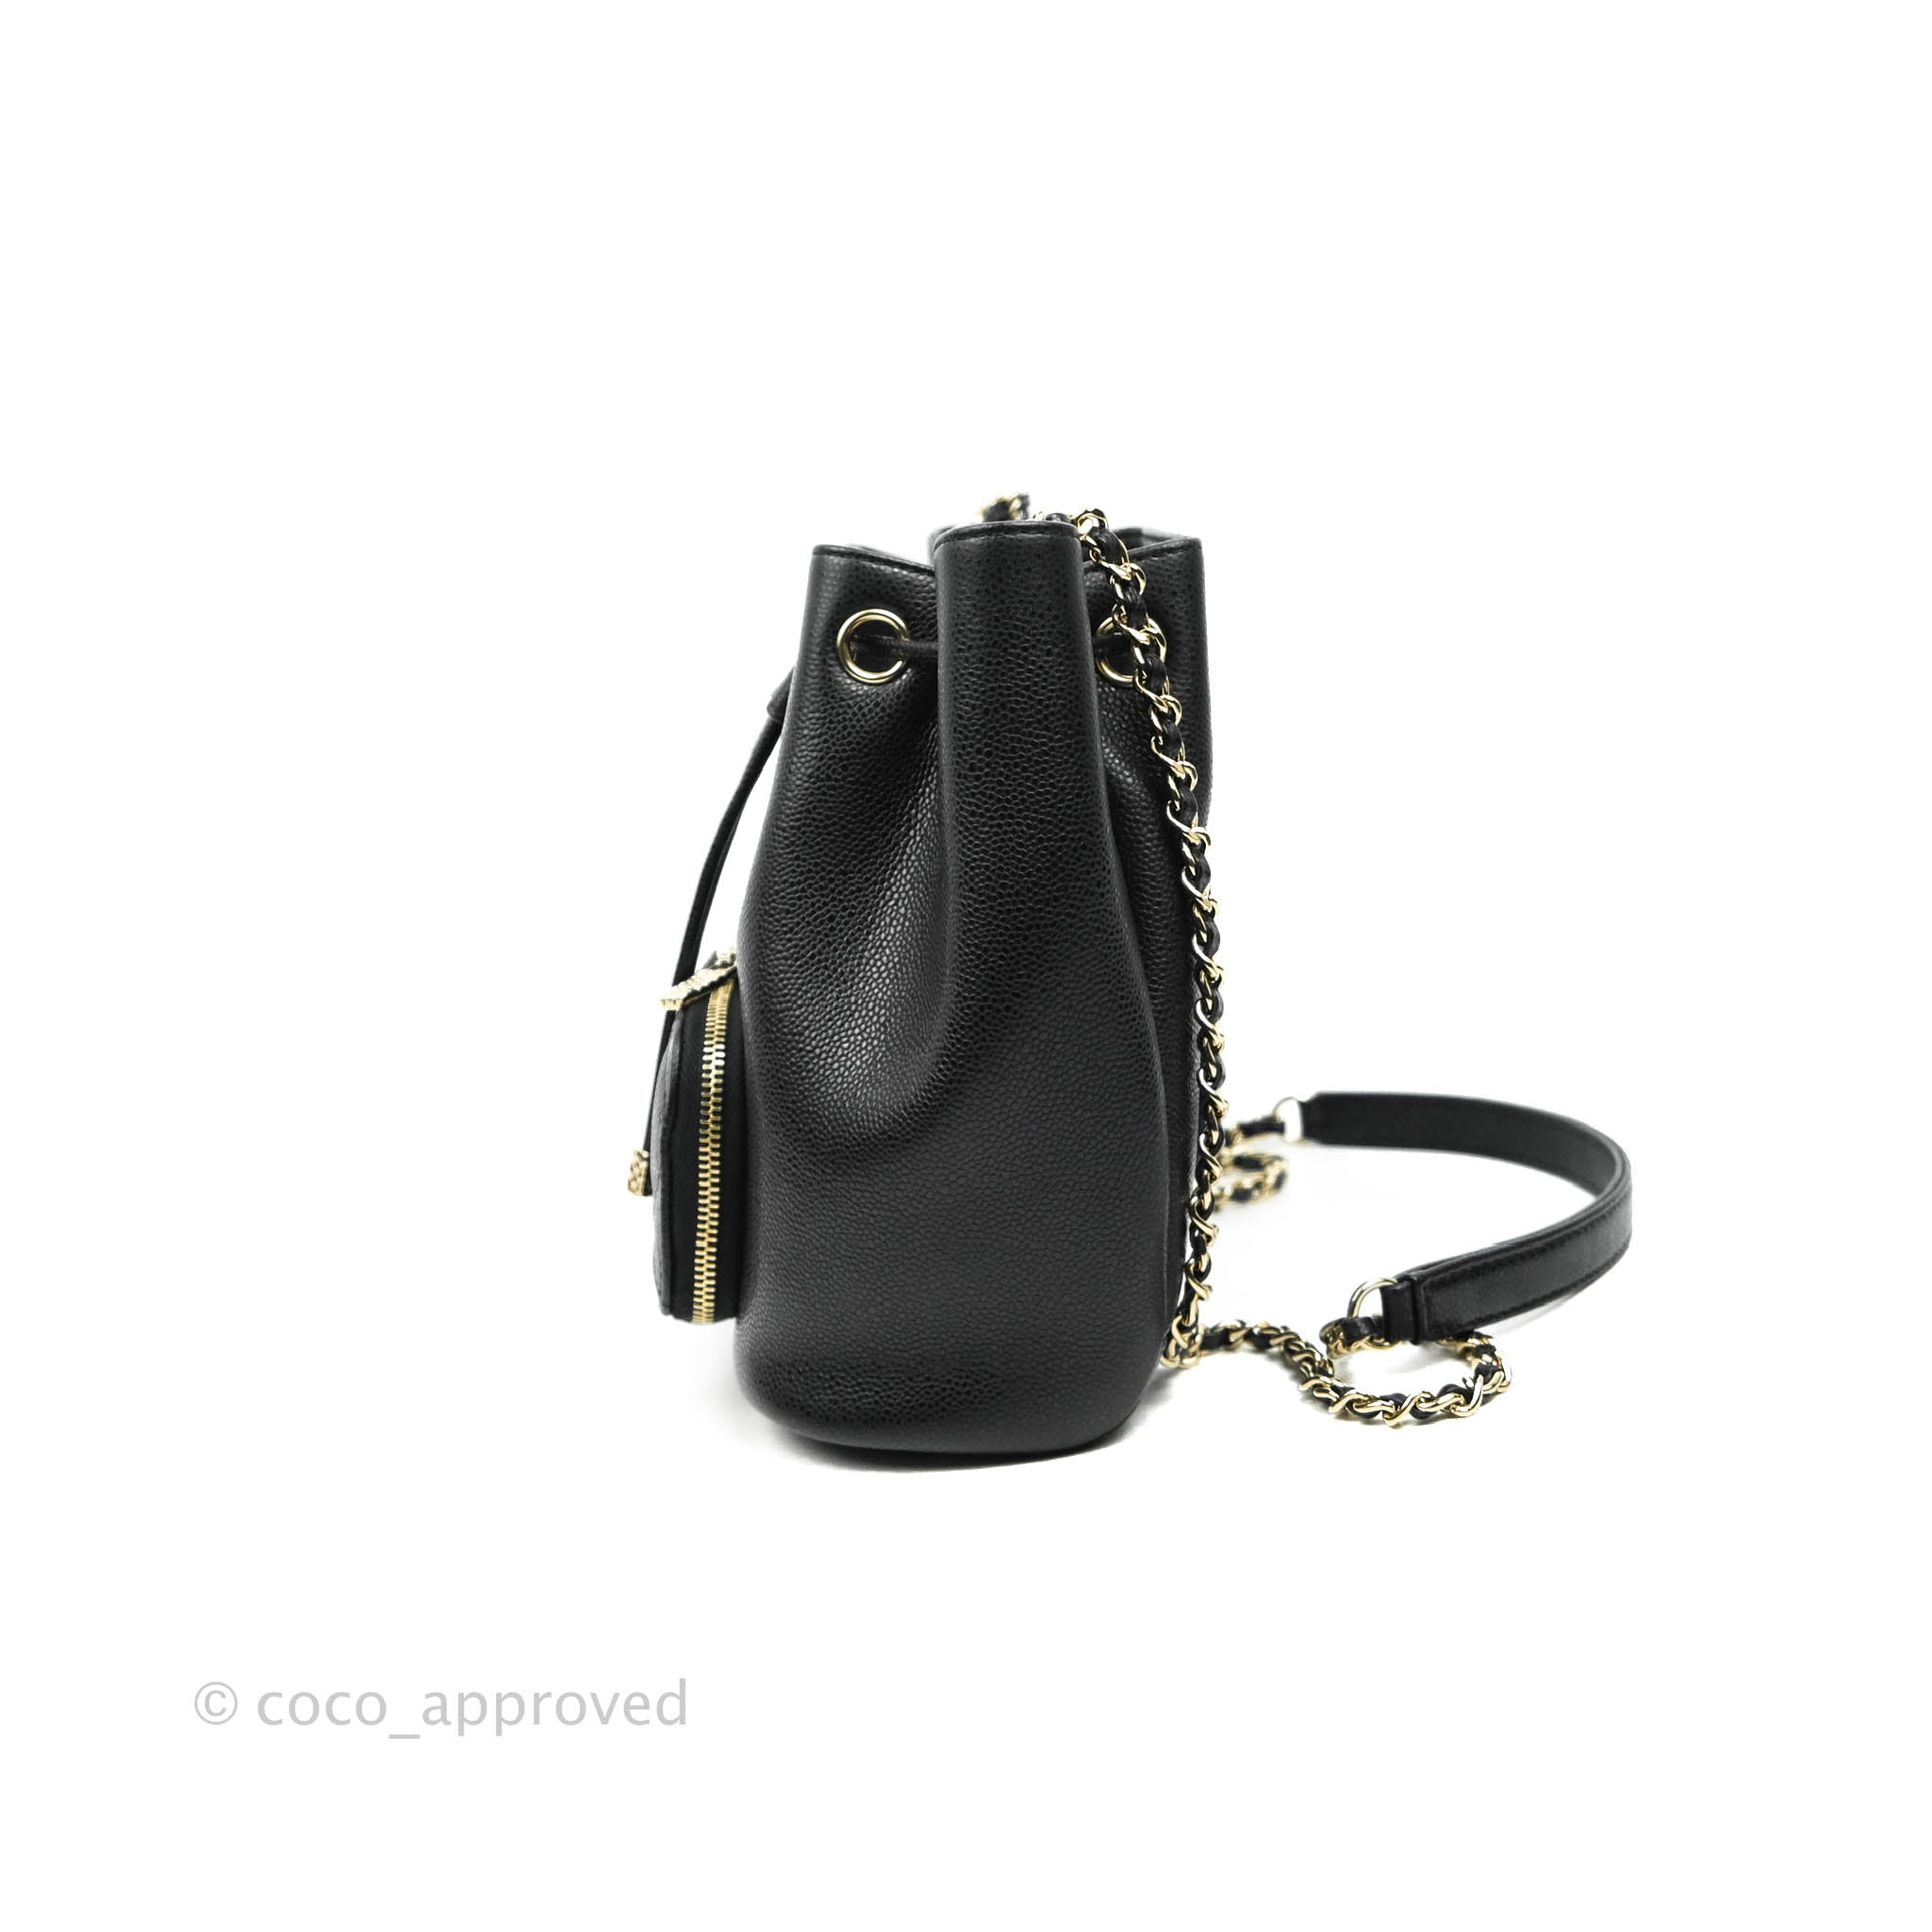 Chanel Business Affinity Black